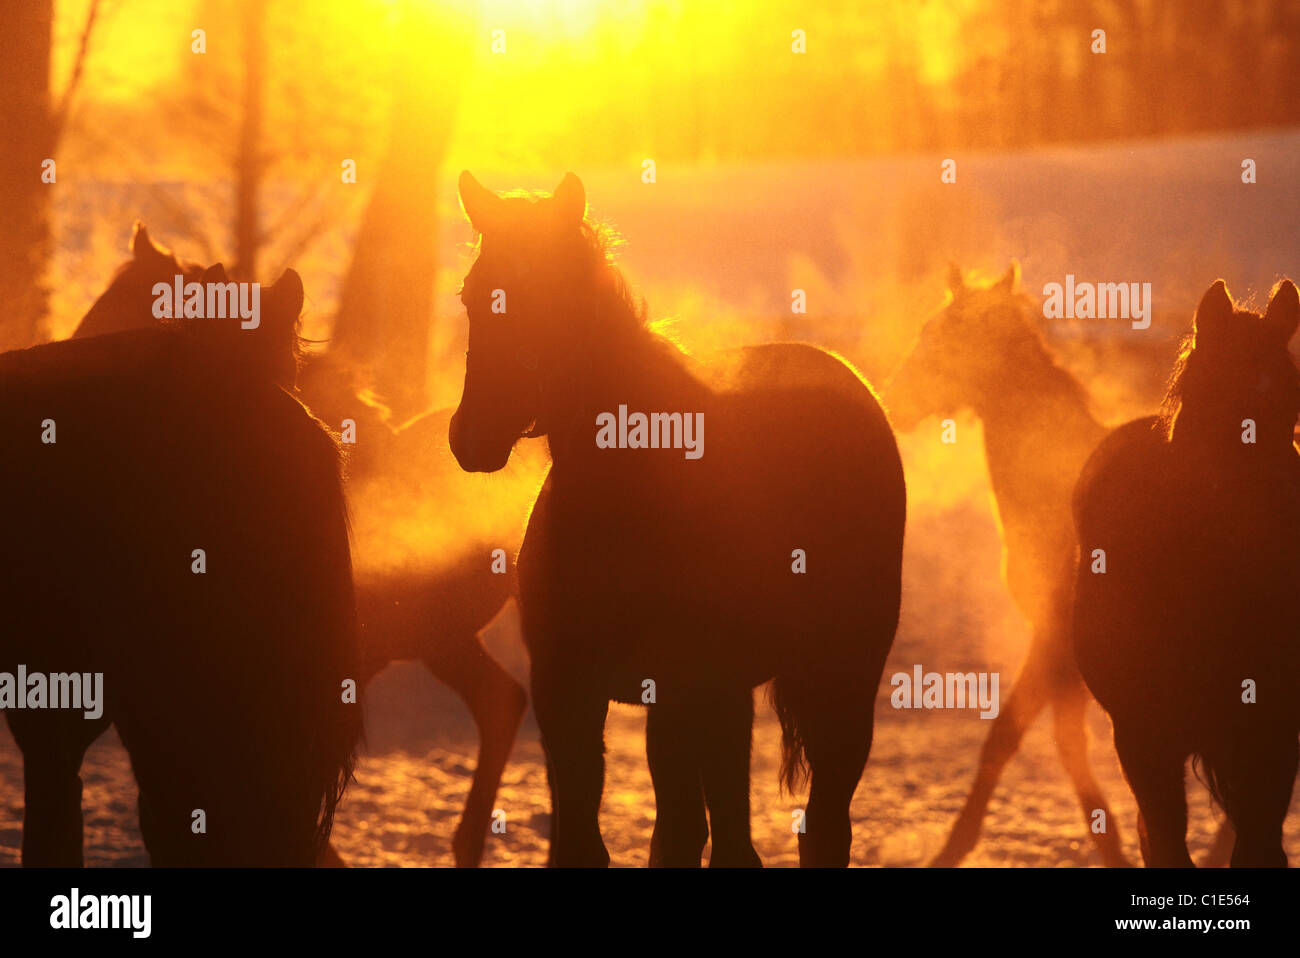 Silhouettes of horses in a paddock at sunrise, Goerlsdorf, Germany Stock Photo